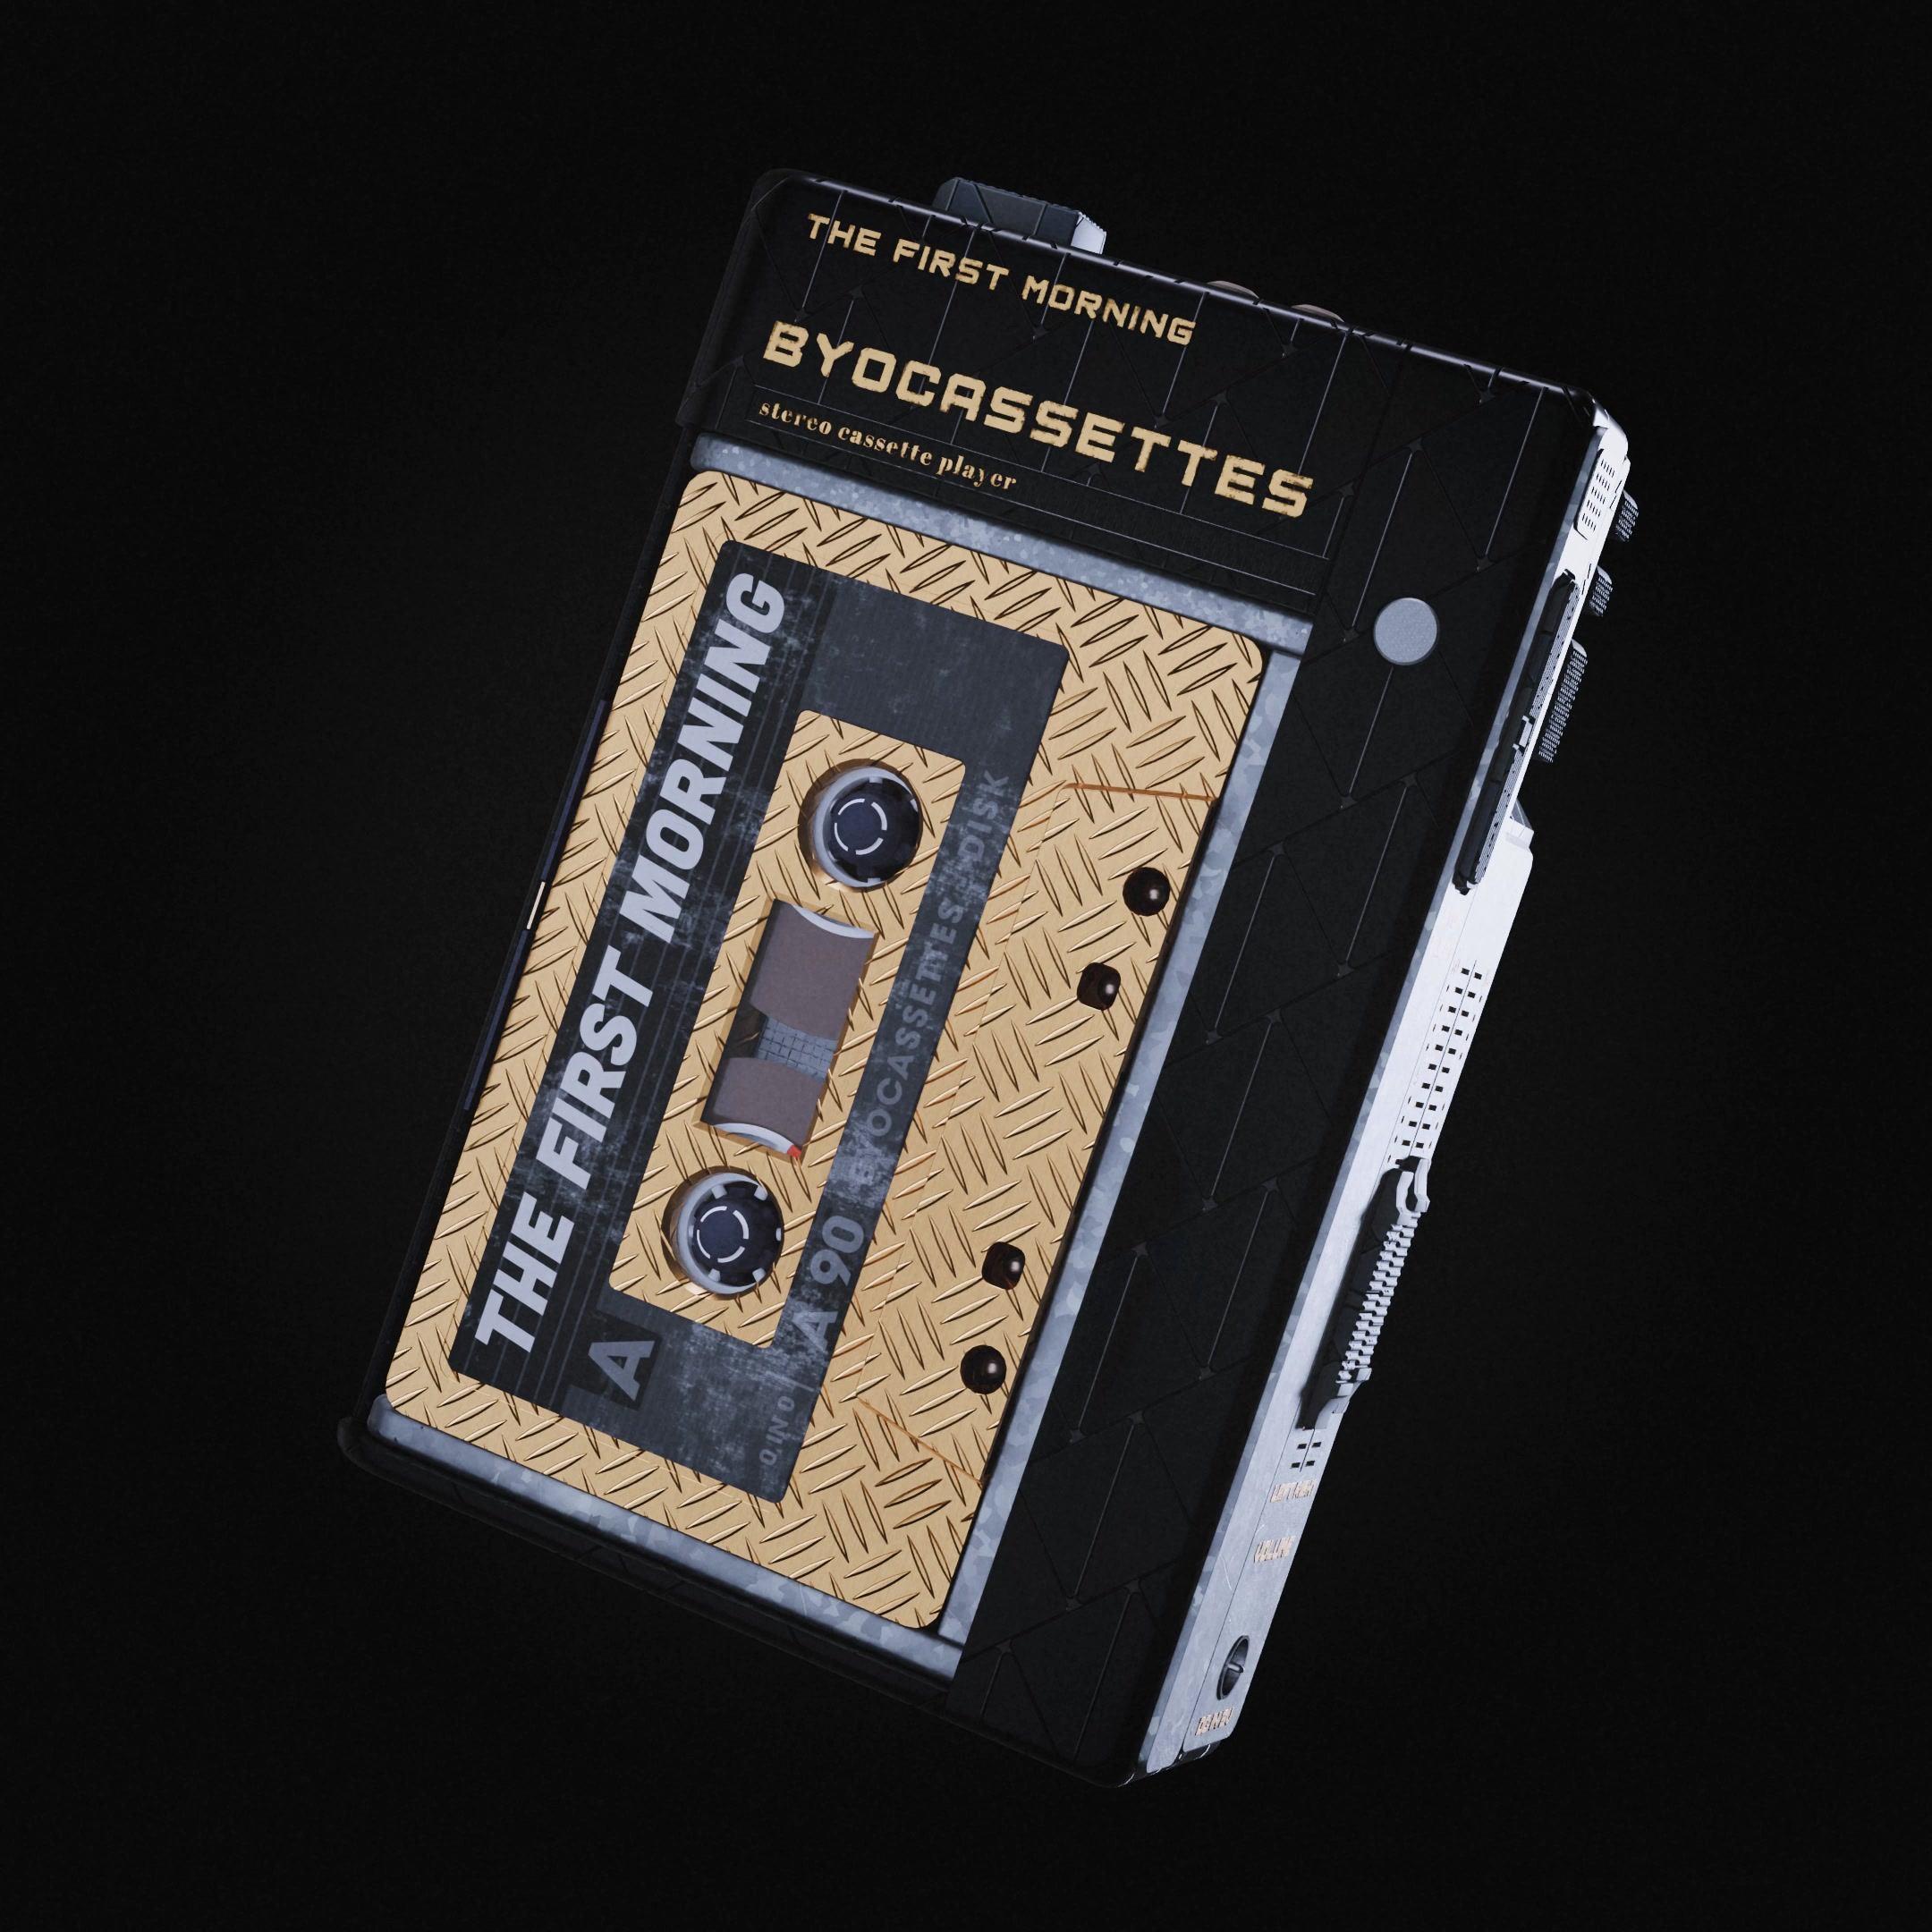 BYOCassette: The First Morning Soundtrack